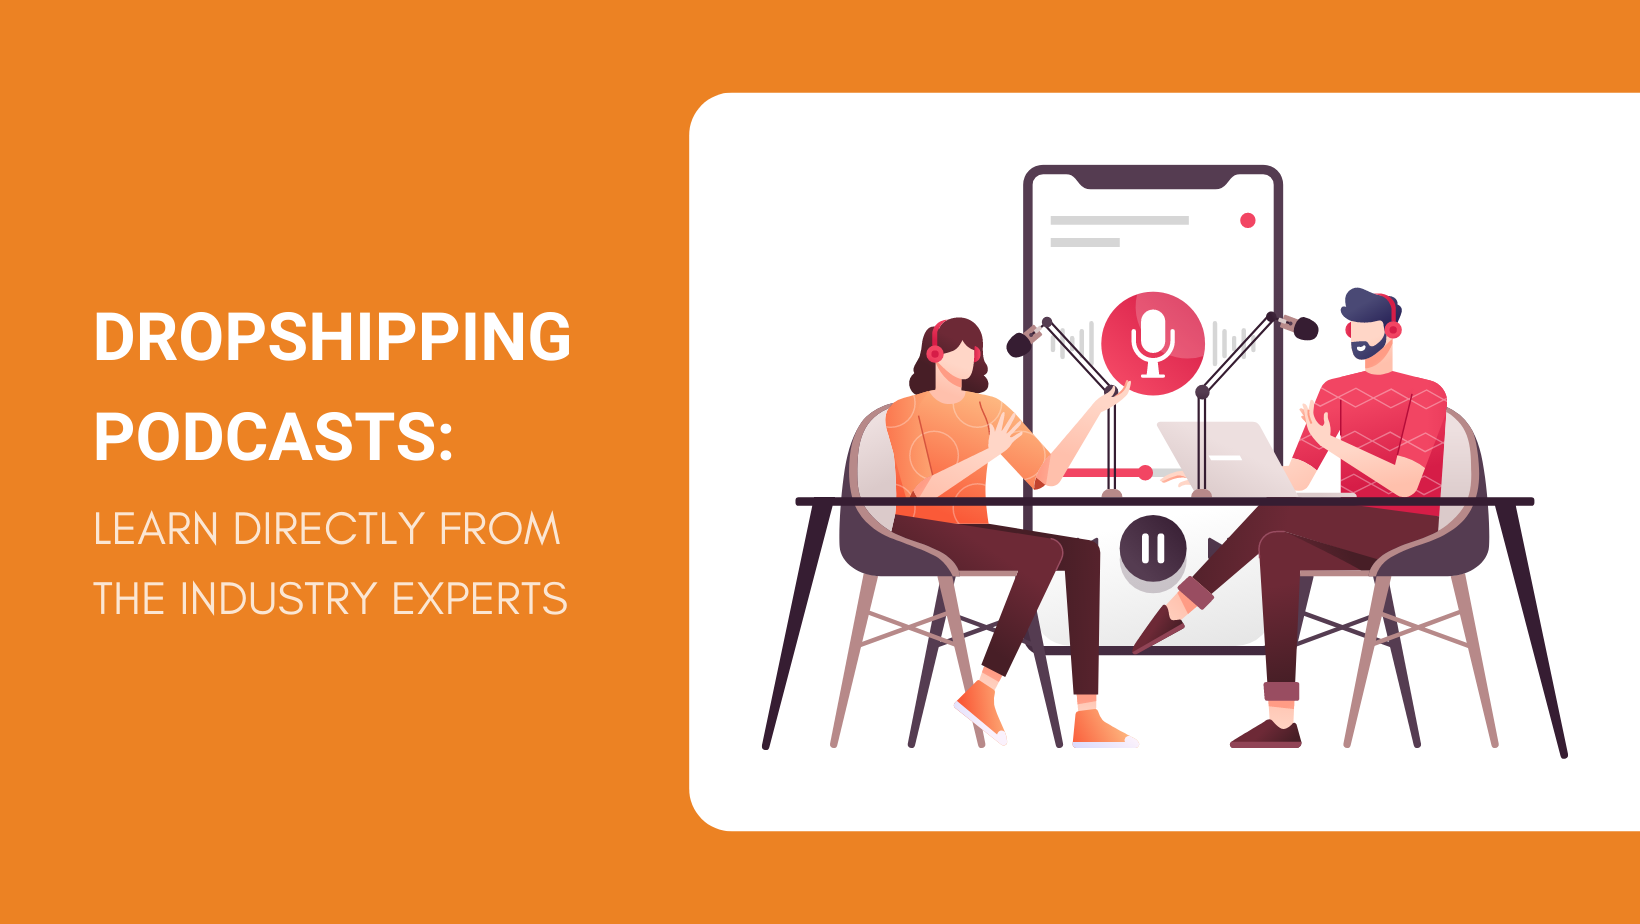 DROPSHIPPING PODCASTS LEARN DIRECTLY FROM THE INDUSTRY EXPERTS